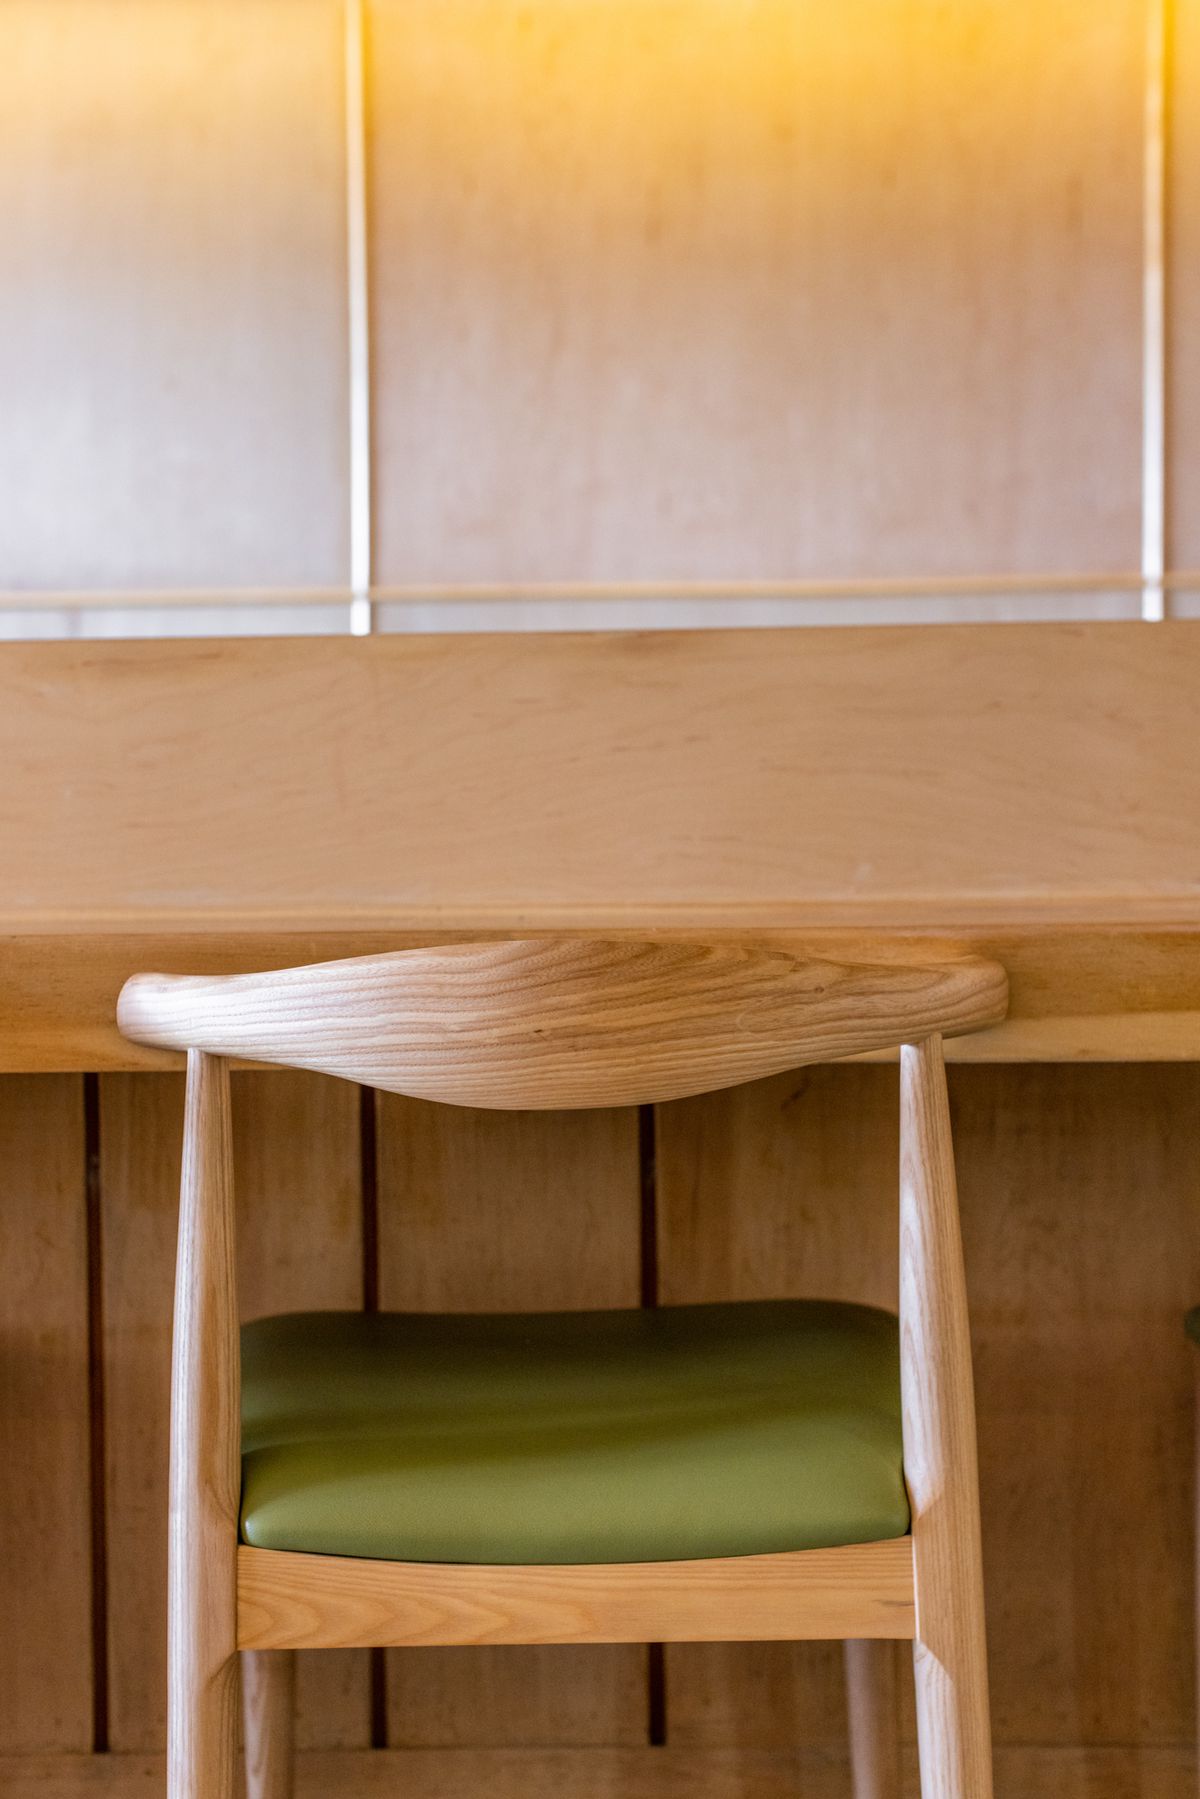 Wood-lined counter with pale green leather seat.